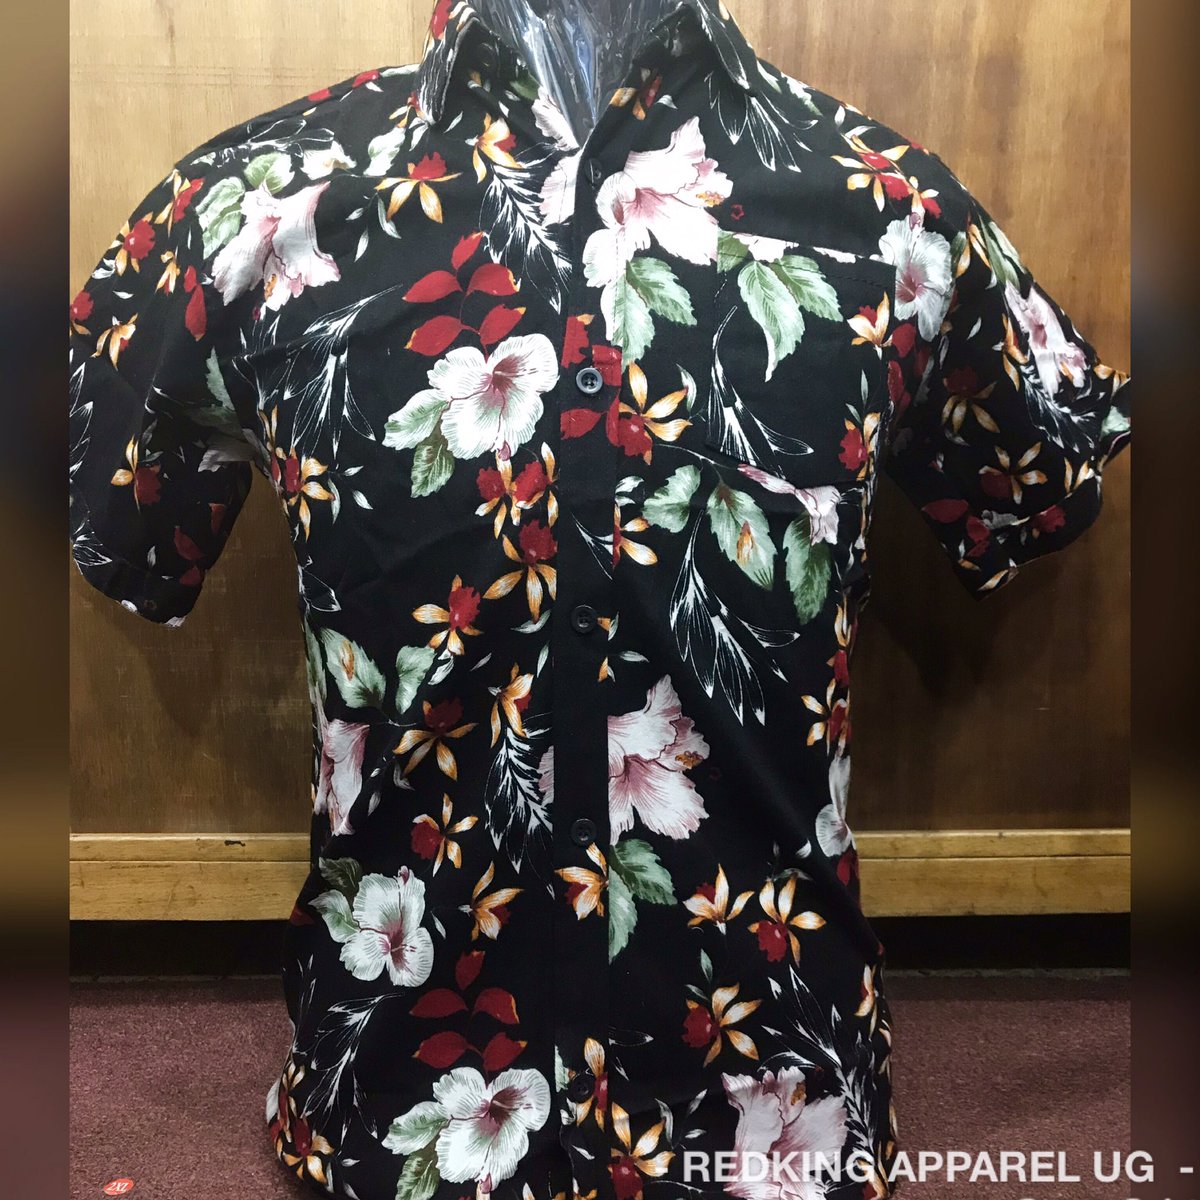 Make it a #funfriday 💃🏾🕺🏾 or #greatweekend 🥳👯‍♀️ with a floral shirt from @RedkingUg 
Available in sizes S, M & L going for only UGX 30,000. 
DM to place your orders or WhatsApp 0754189006 
#floral_perfection #dapperday